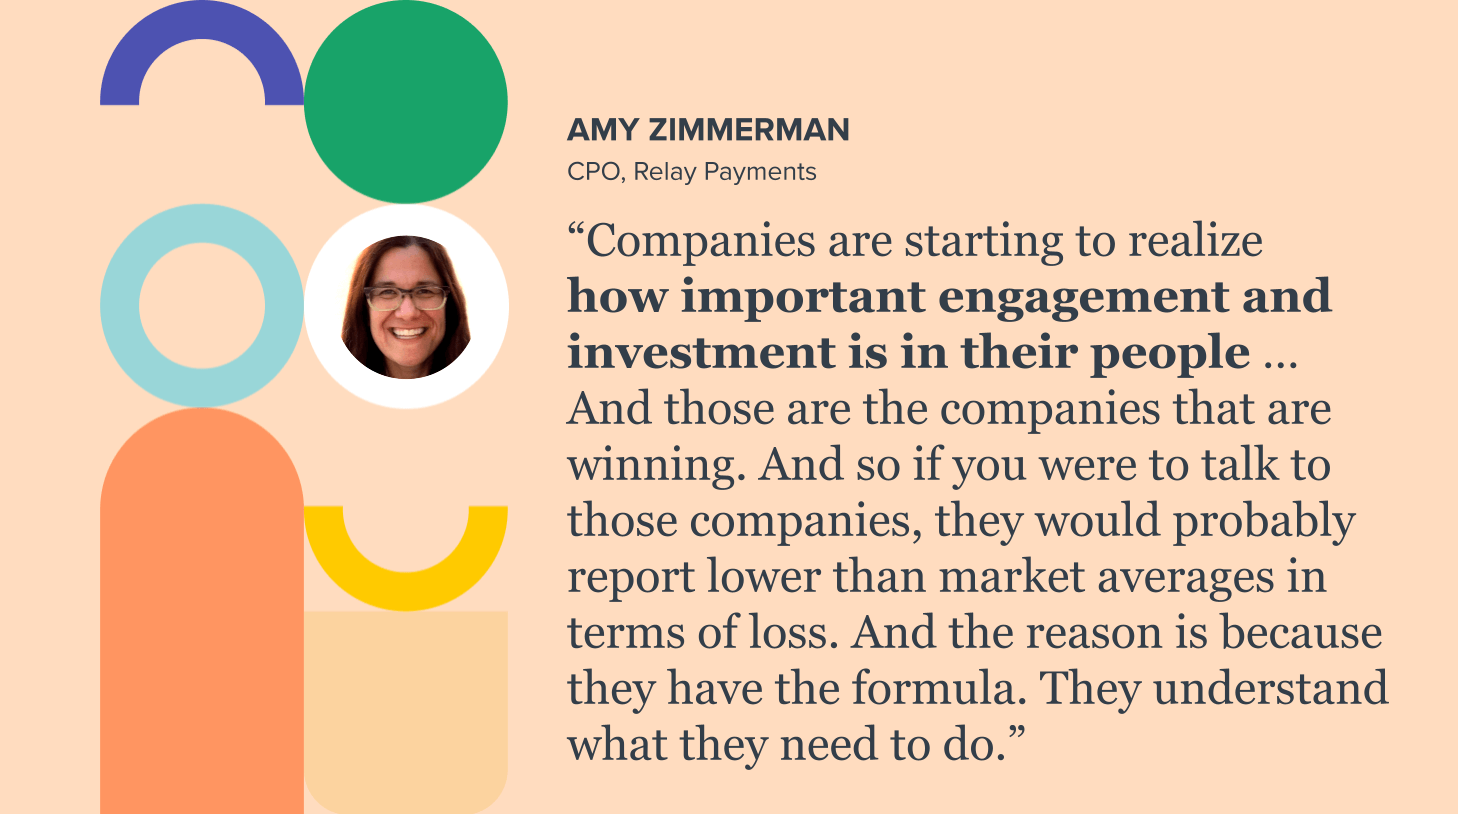 Amy Zimmerman, Relay Payments: “Companies are starting to realize how important engagement and investment is in their people … And those are the companies that are winning. And so if you were to talk to those companies, they would probably report lower than market averages in terms of loss. And the reason is because they have the formula. They understand what they need to do.” 